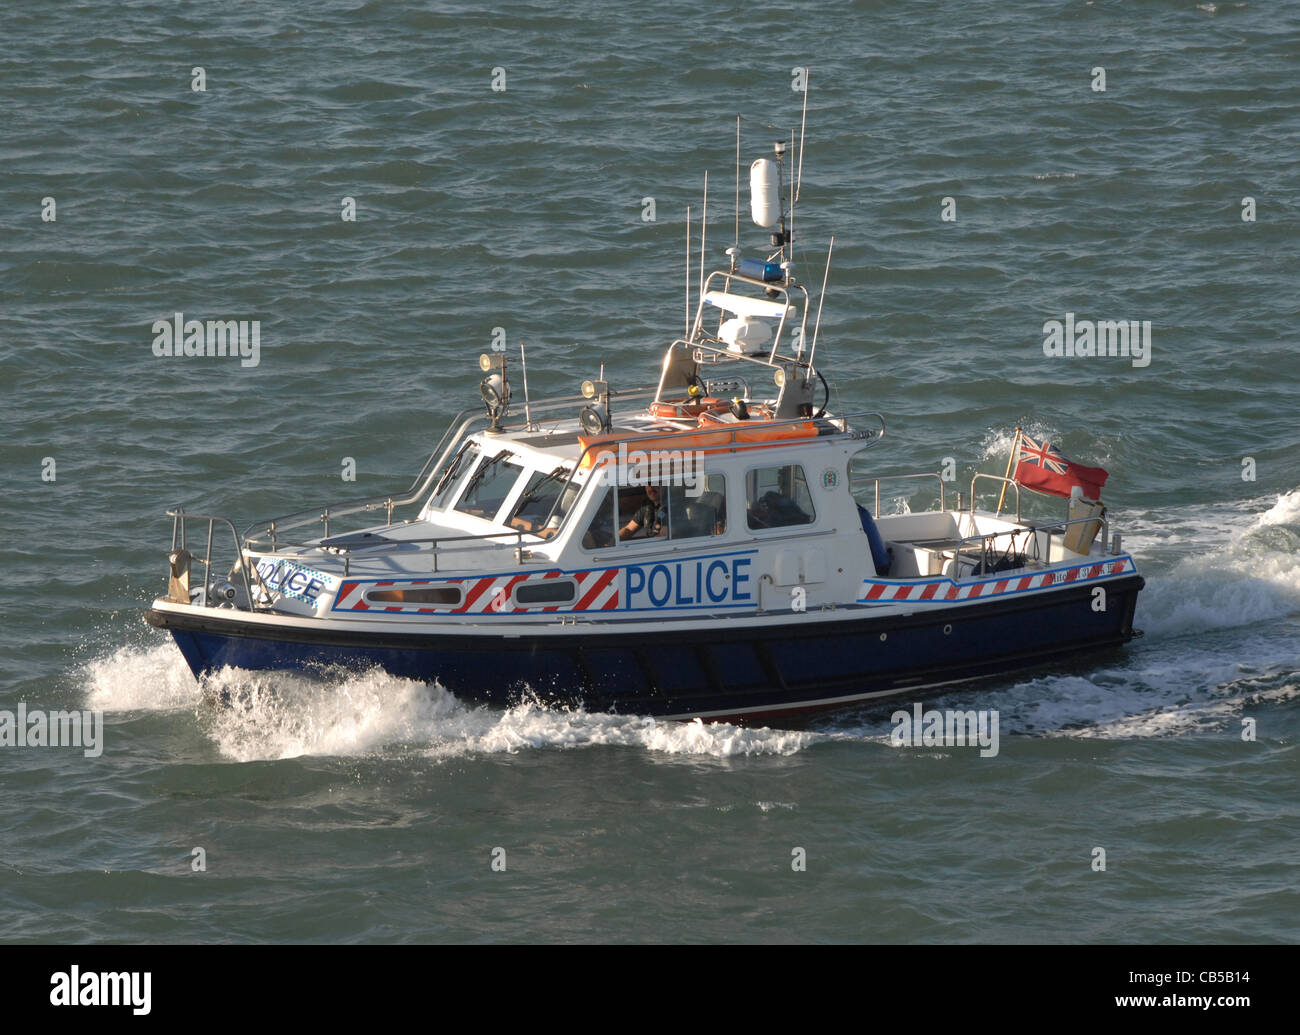 A police launch on maritime patrol duties protecting ports and harbors. Stock Photo